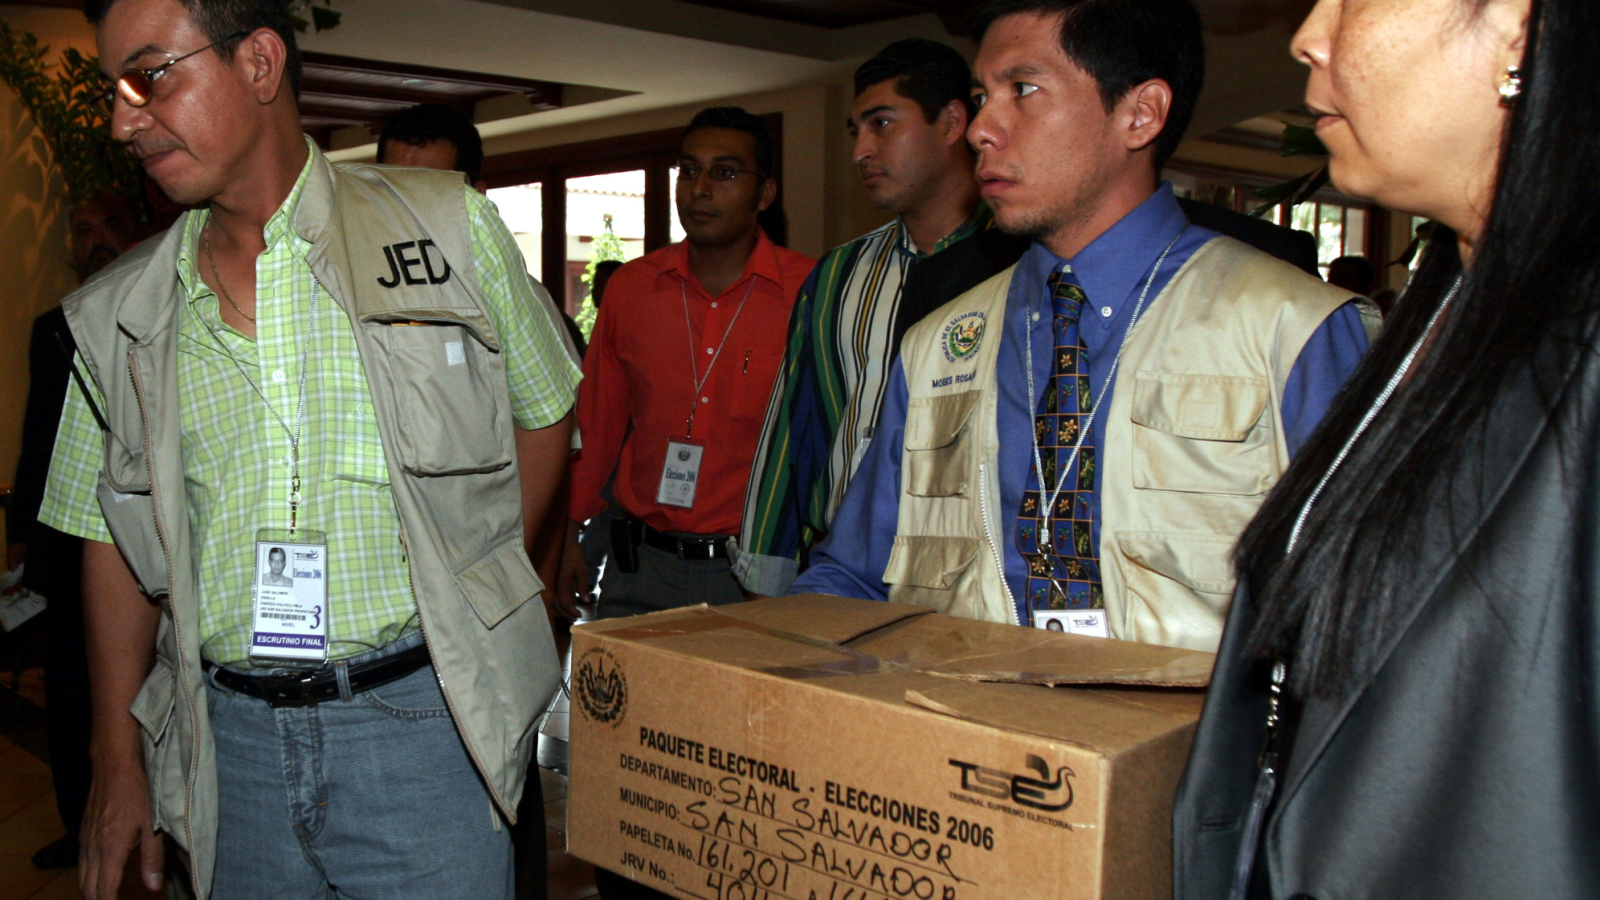 Members of the Supreme Electoral Tribunal arrive at a hotel with a box full of ballots to be counted from mayoral and legislative elections in San Salvador, El Salvador, Tuesday, March 14, 2006. ( AP Photo/Luis Romero)